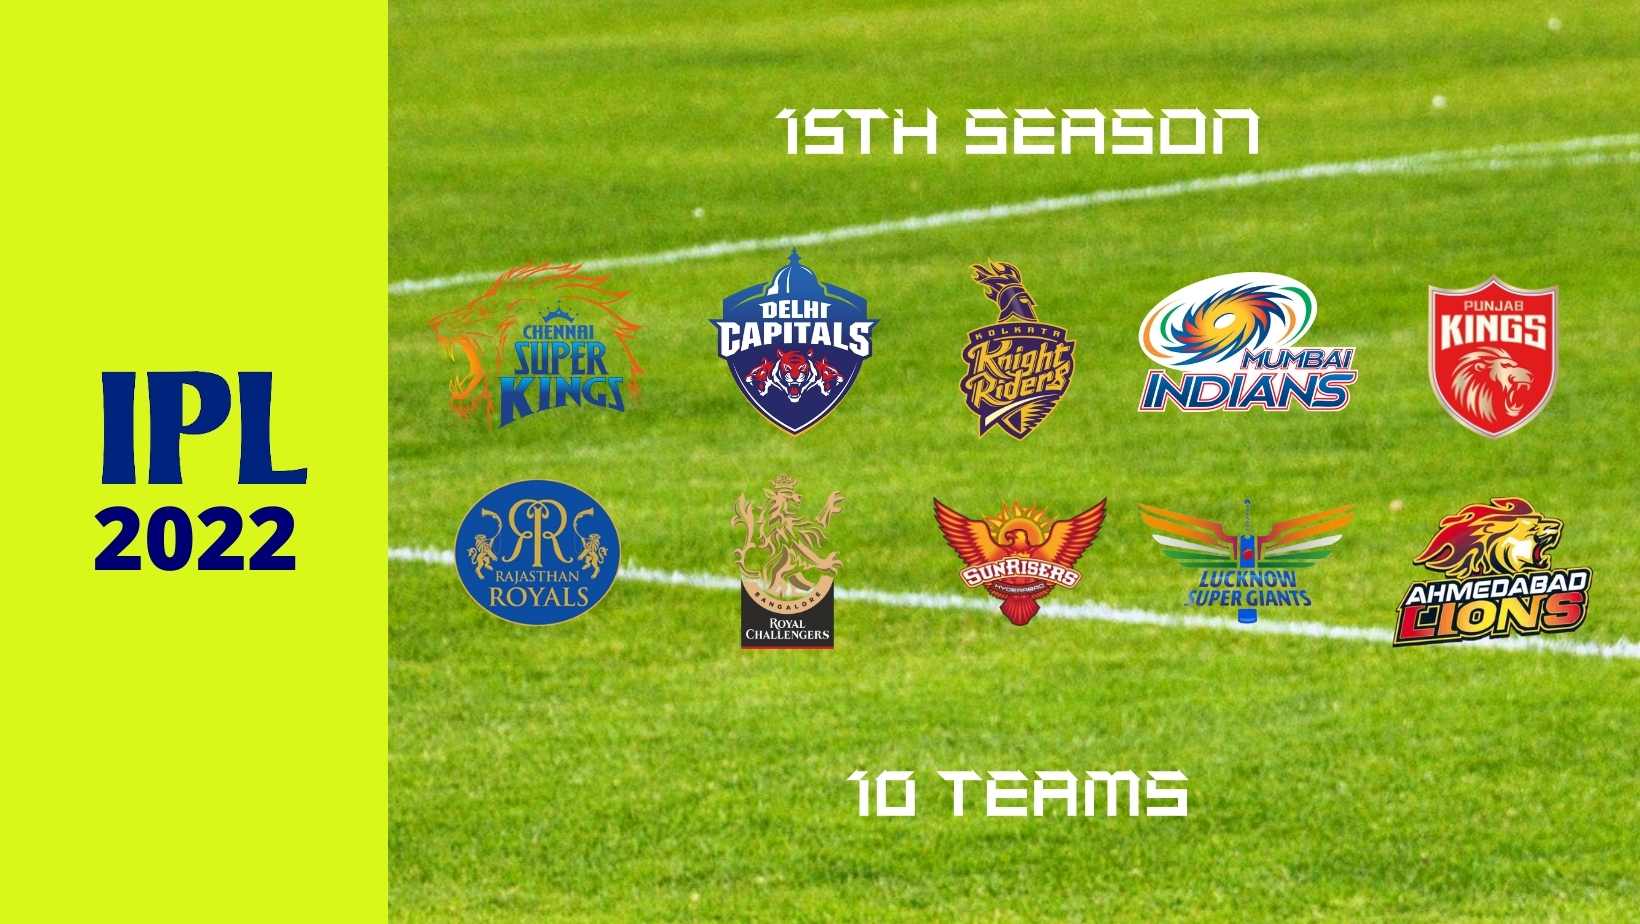 Review of the 15th season of the Indian Premier League teams